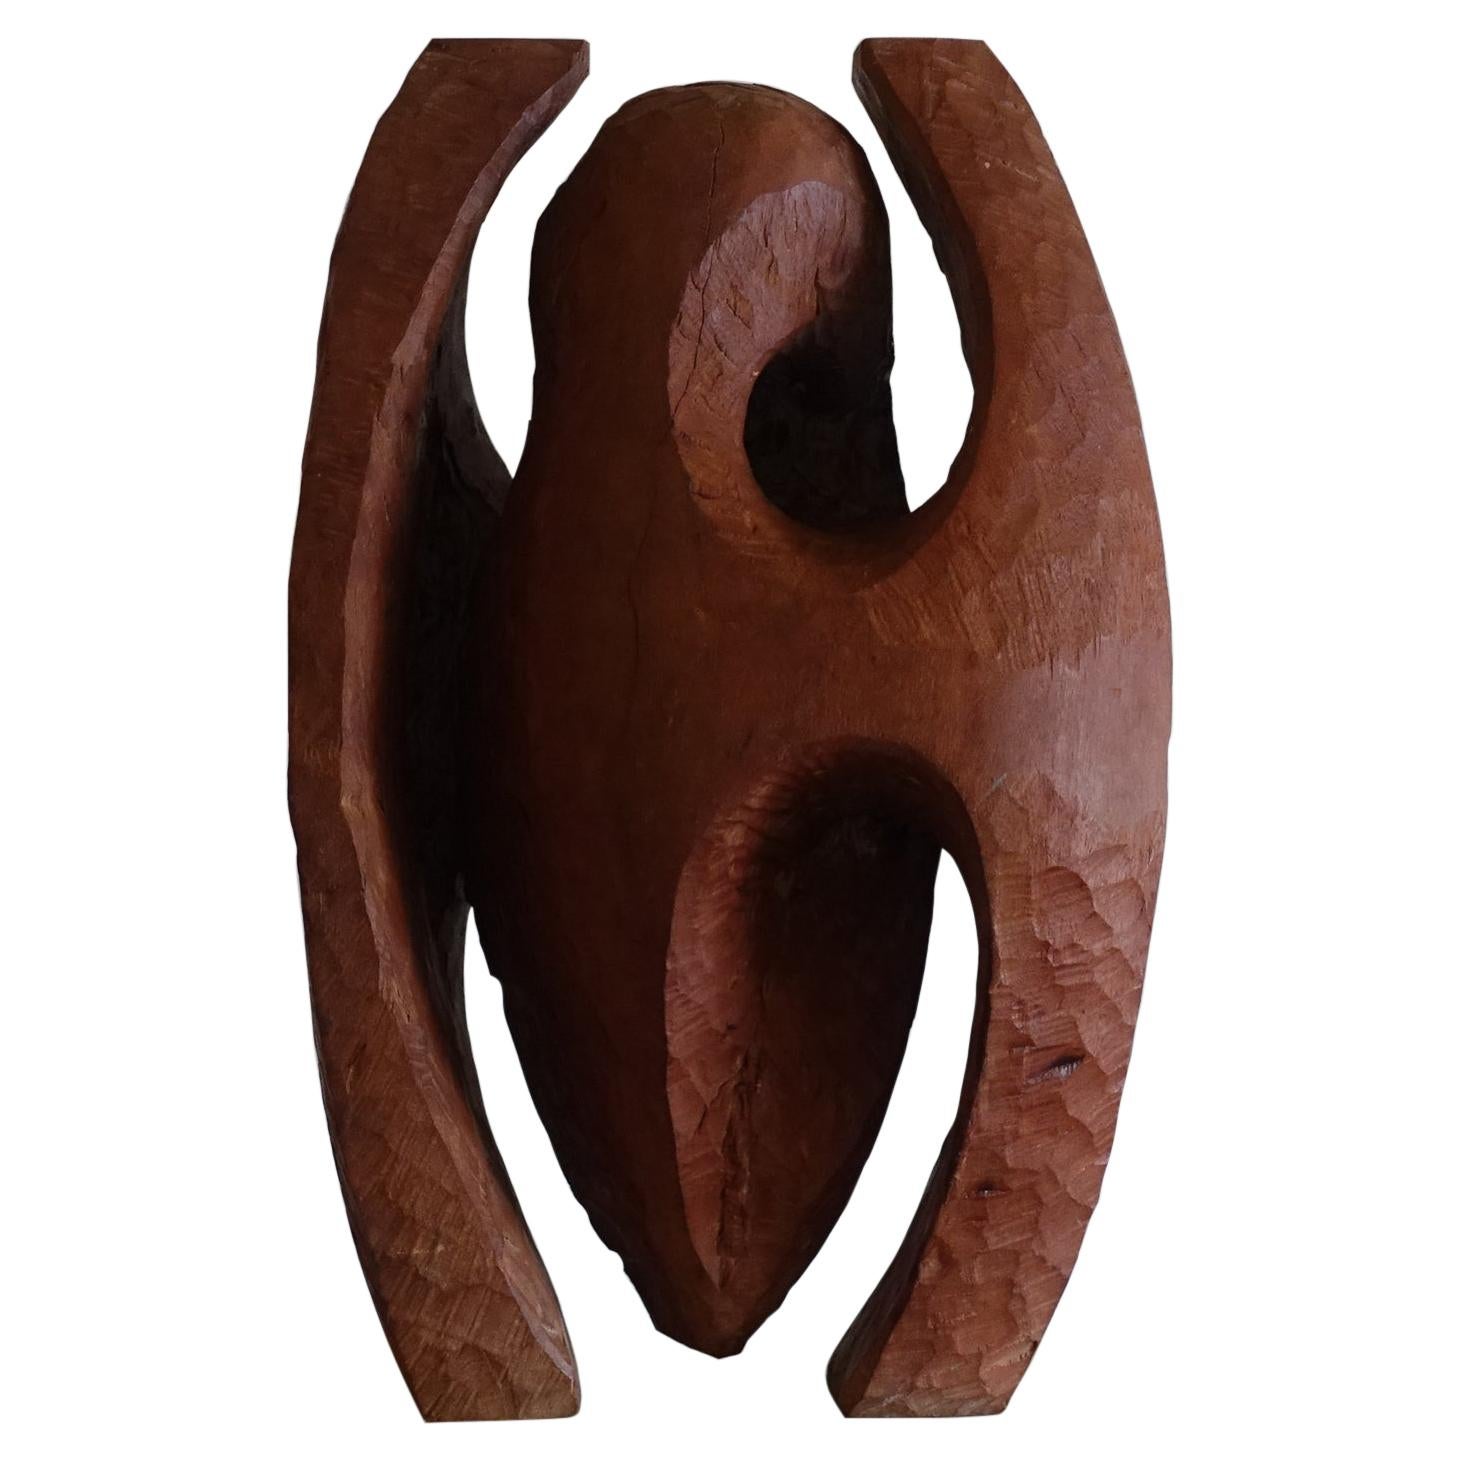 1960s Wood Sculpture by Dragoljub Milosevic